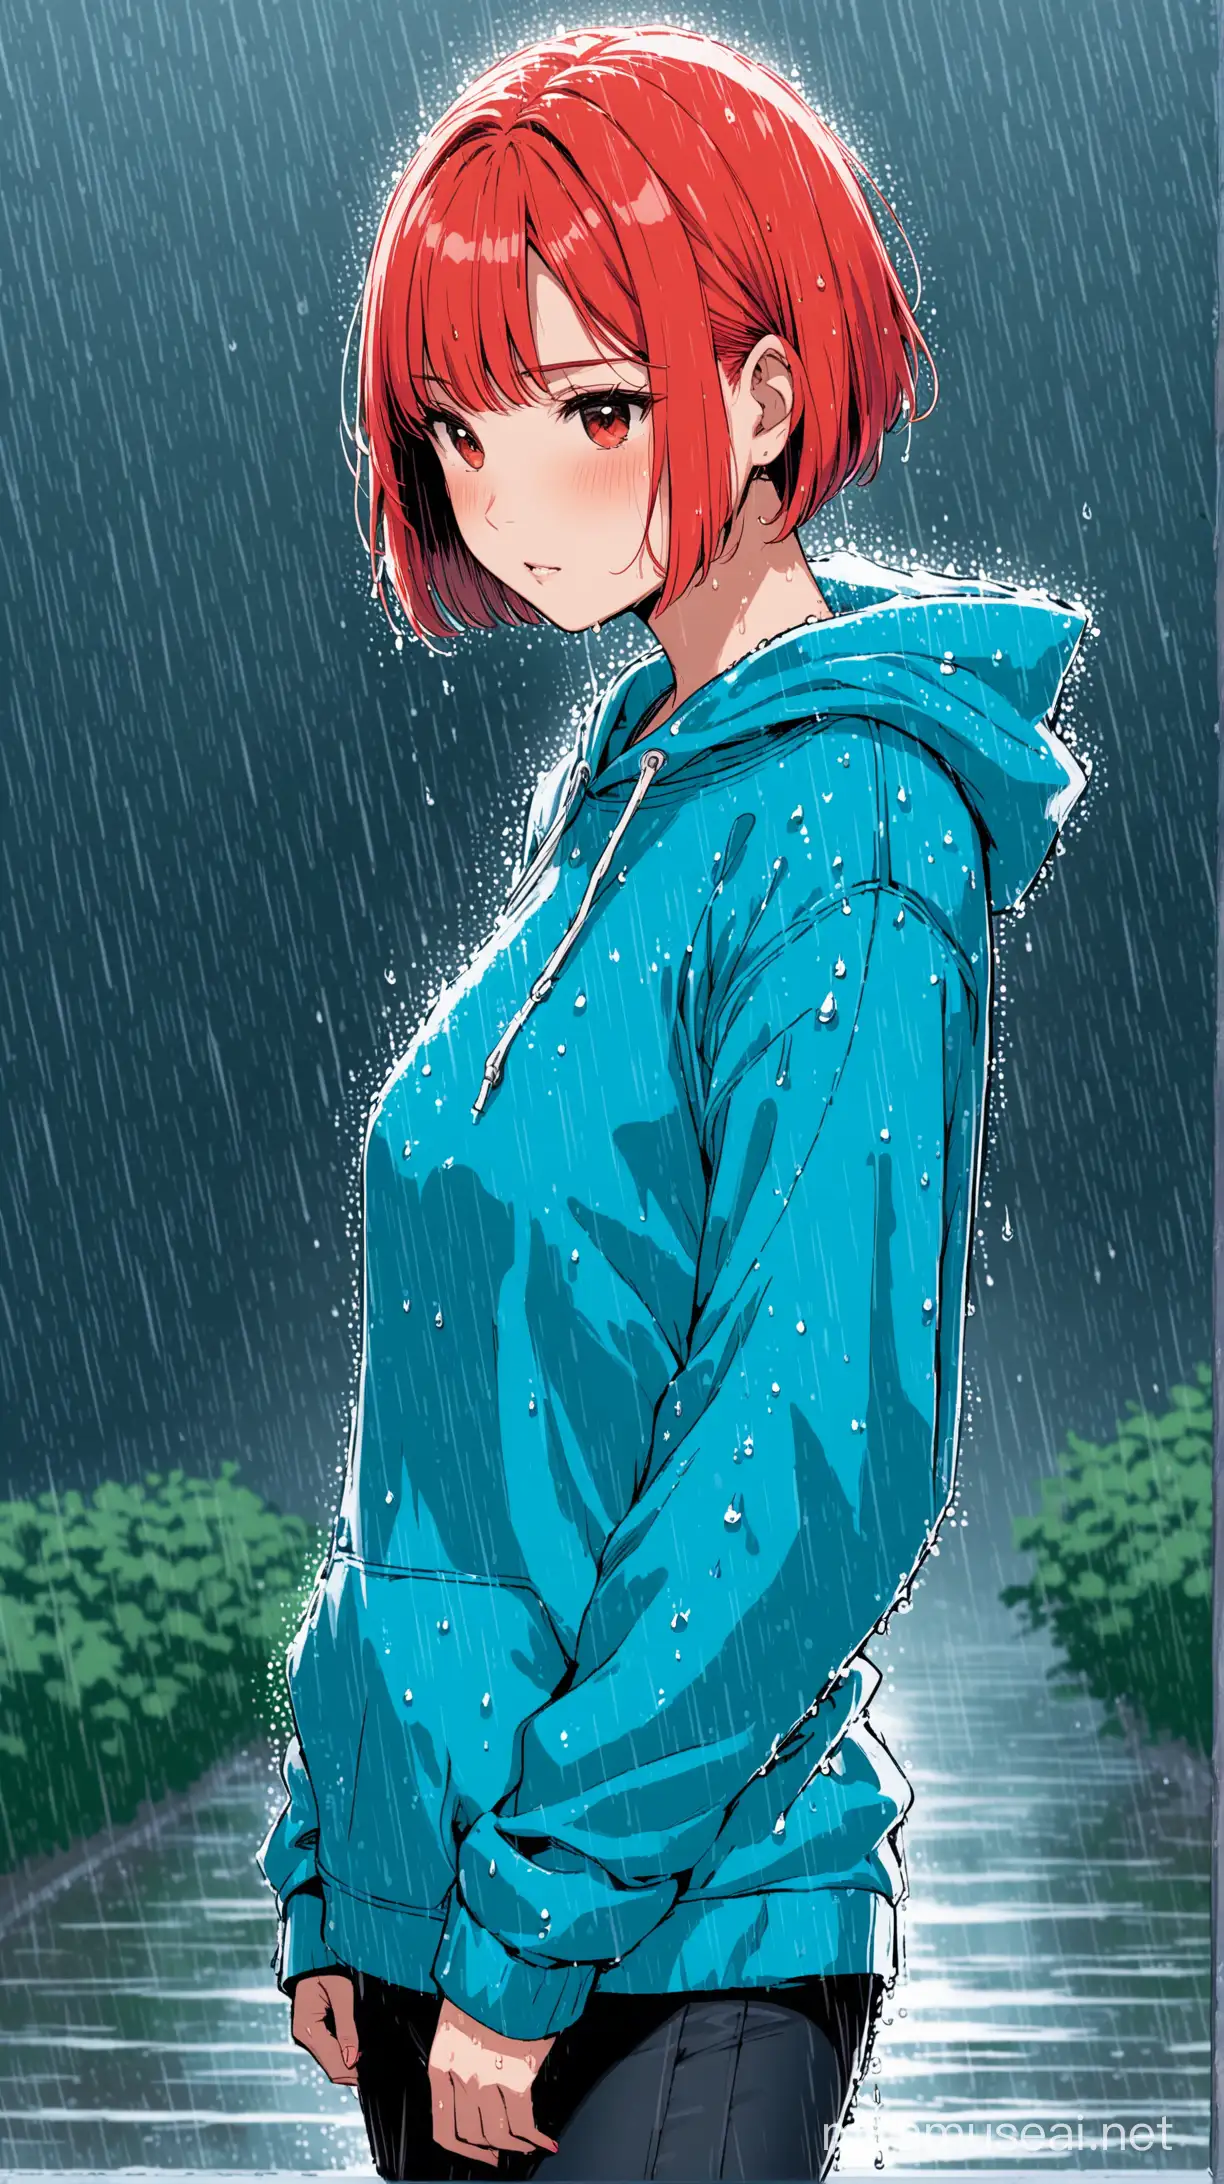 RedHaired Woman in Blue Sweatshirt Embracing Rainy Day Serenity